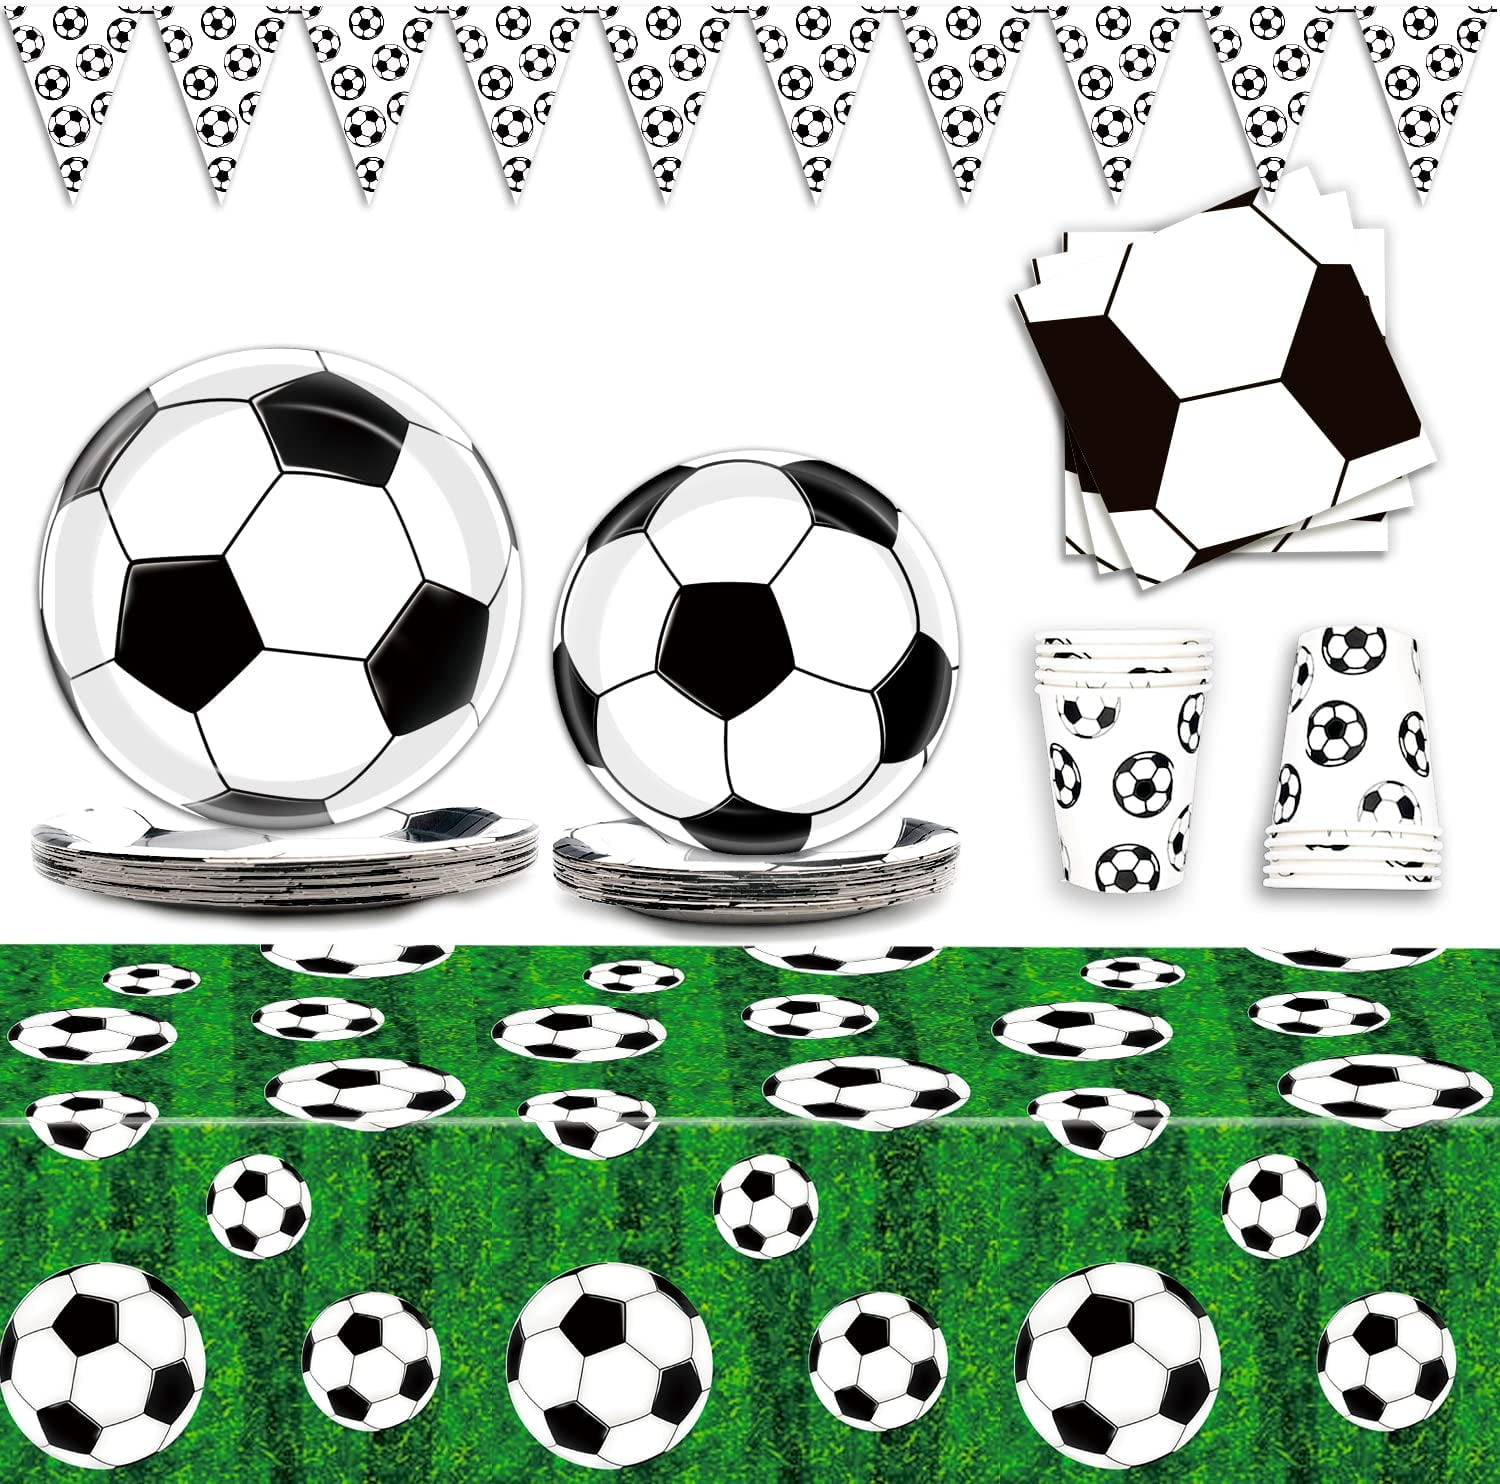 Birthday Party iMagitek 48 Pack Soccer Ball Cupcake Toppers Decorations for Soccer Ball Theme Party Baby Shower 